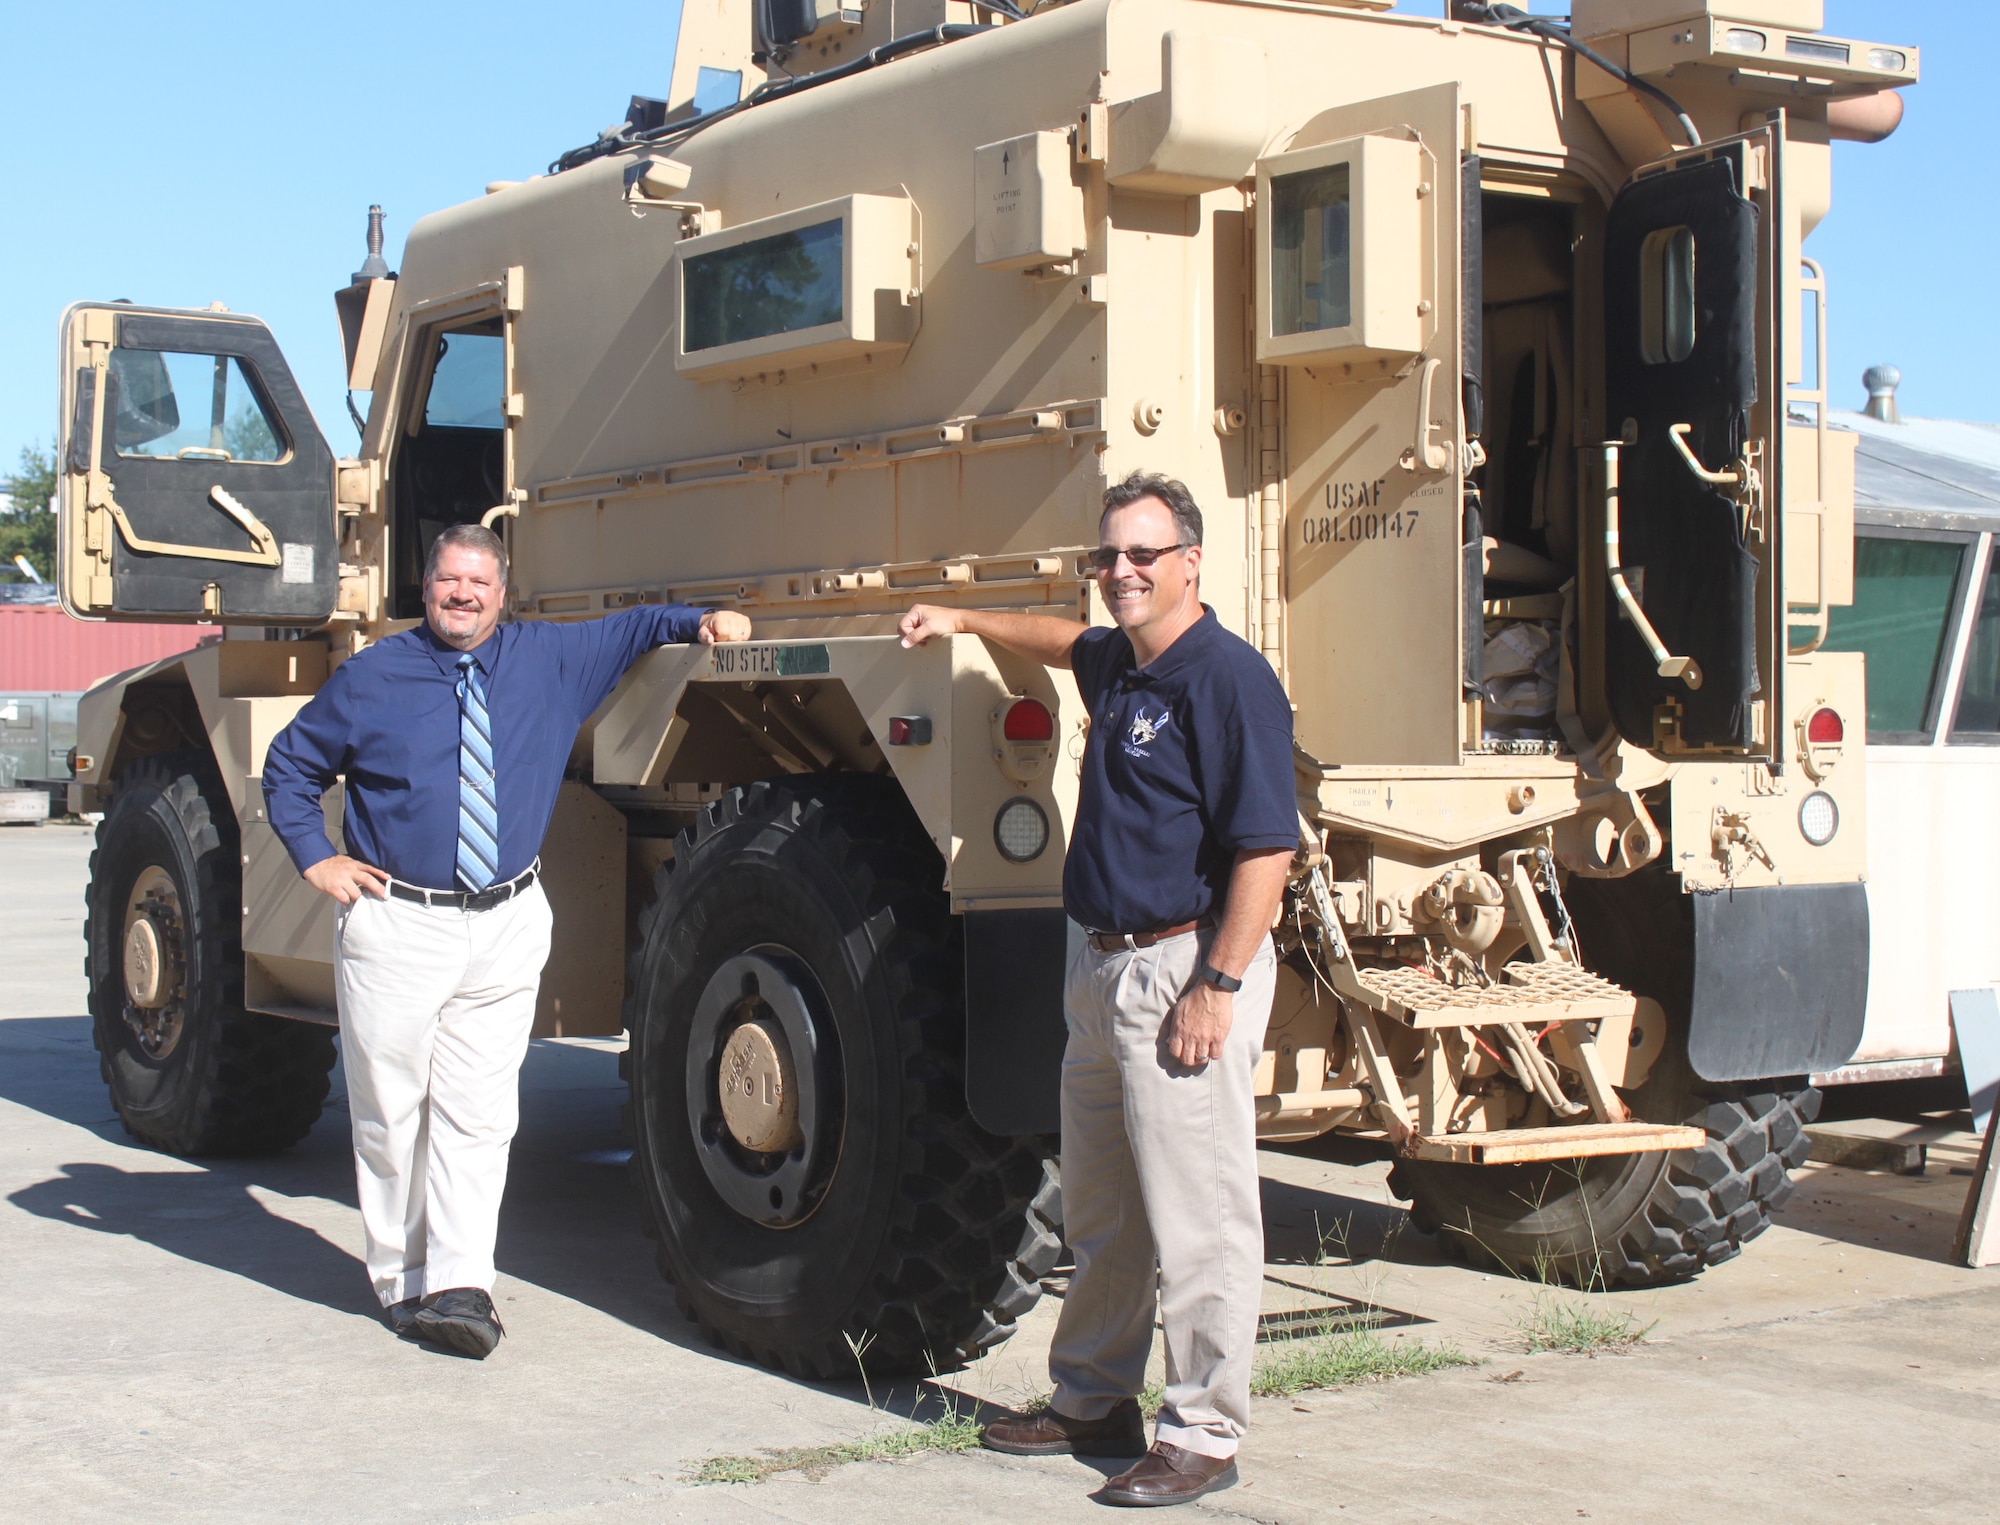 From left, Ed Jones, Air Force Life Cycle Management Center Support Equipment and Vehicles Division operations director, and Ted Hecker, AFLCMC MRAP logistics manager, take time off from the sustainment and acquisition work they do each day to take a tour of the museum’s new MRAP, which is sustained here. (U.S. Air Force photo by Angela Woolen)